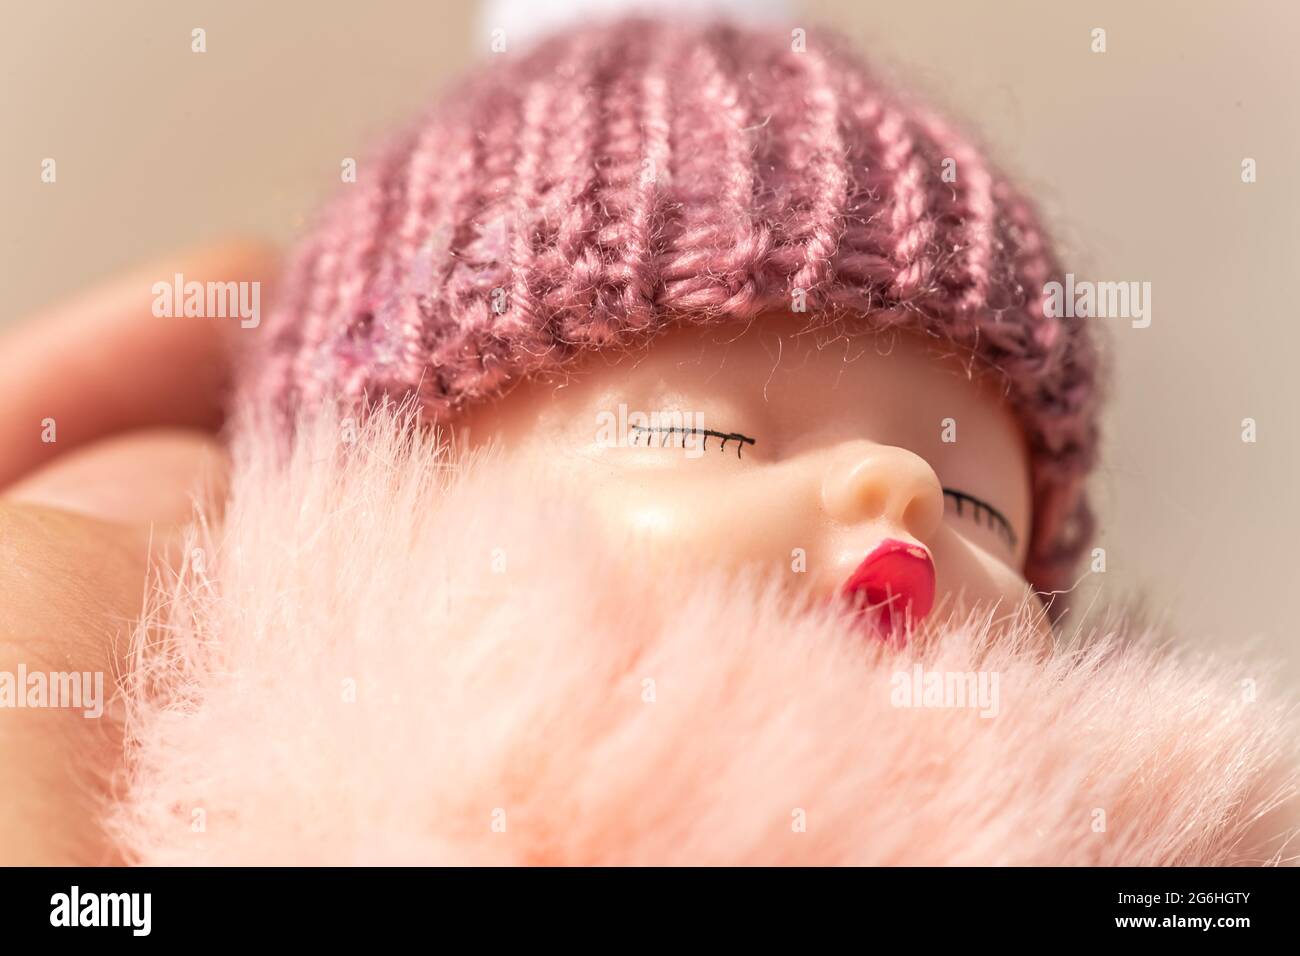 Close-up of a sleeping baby puppet held by a person Stock Photo